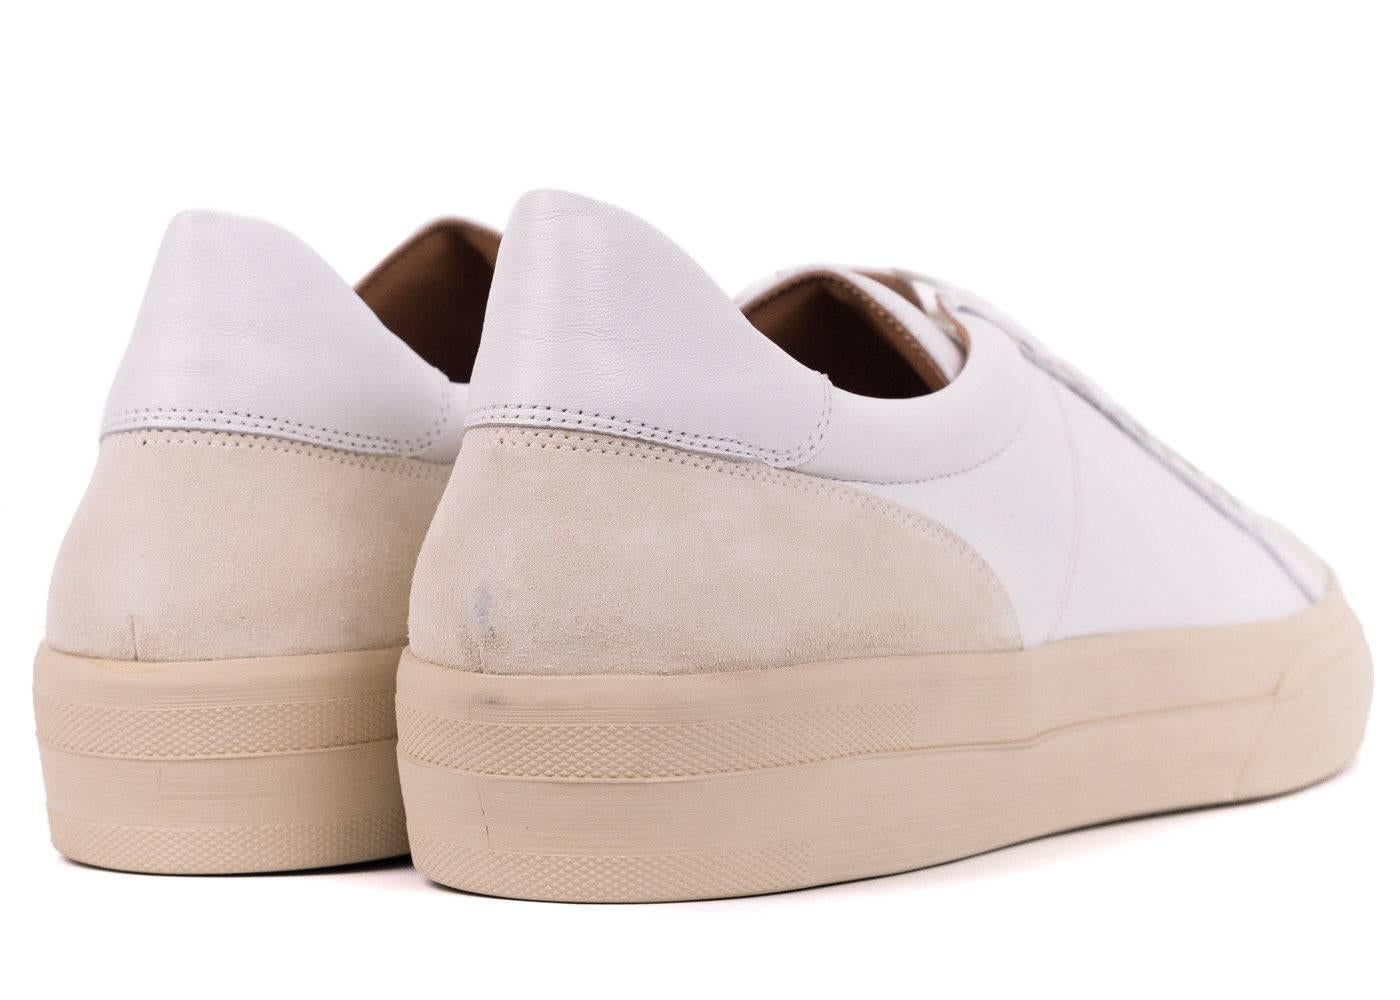 Dries Van Noten Men's White Leather Low Top Cap Toe Sneakers In New Condition For Sale In Brooklyn, NY